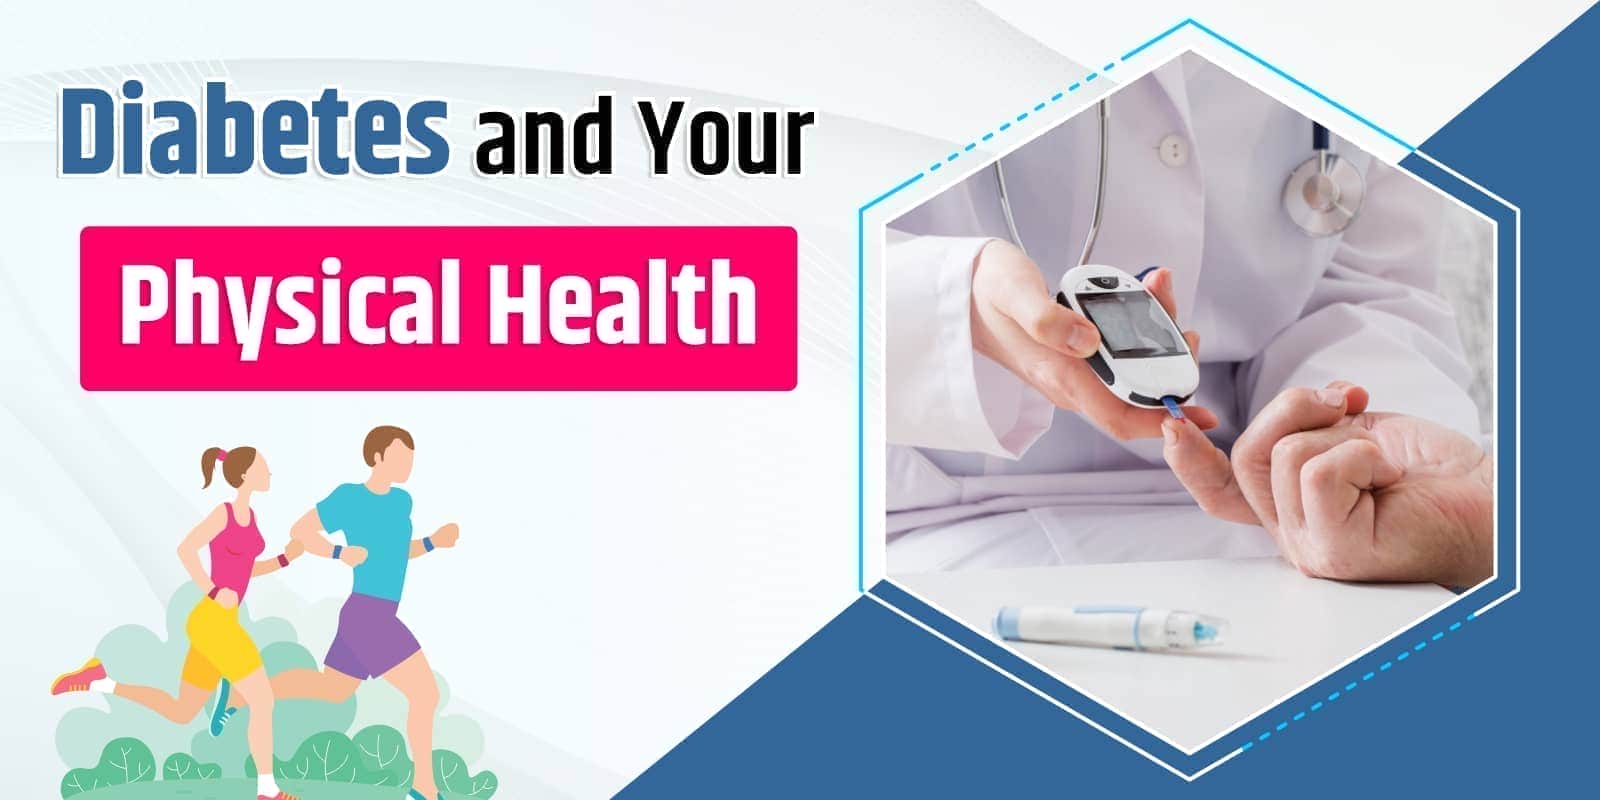 Diabetes and Your Physical Health